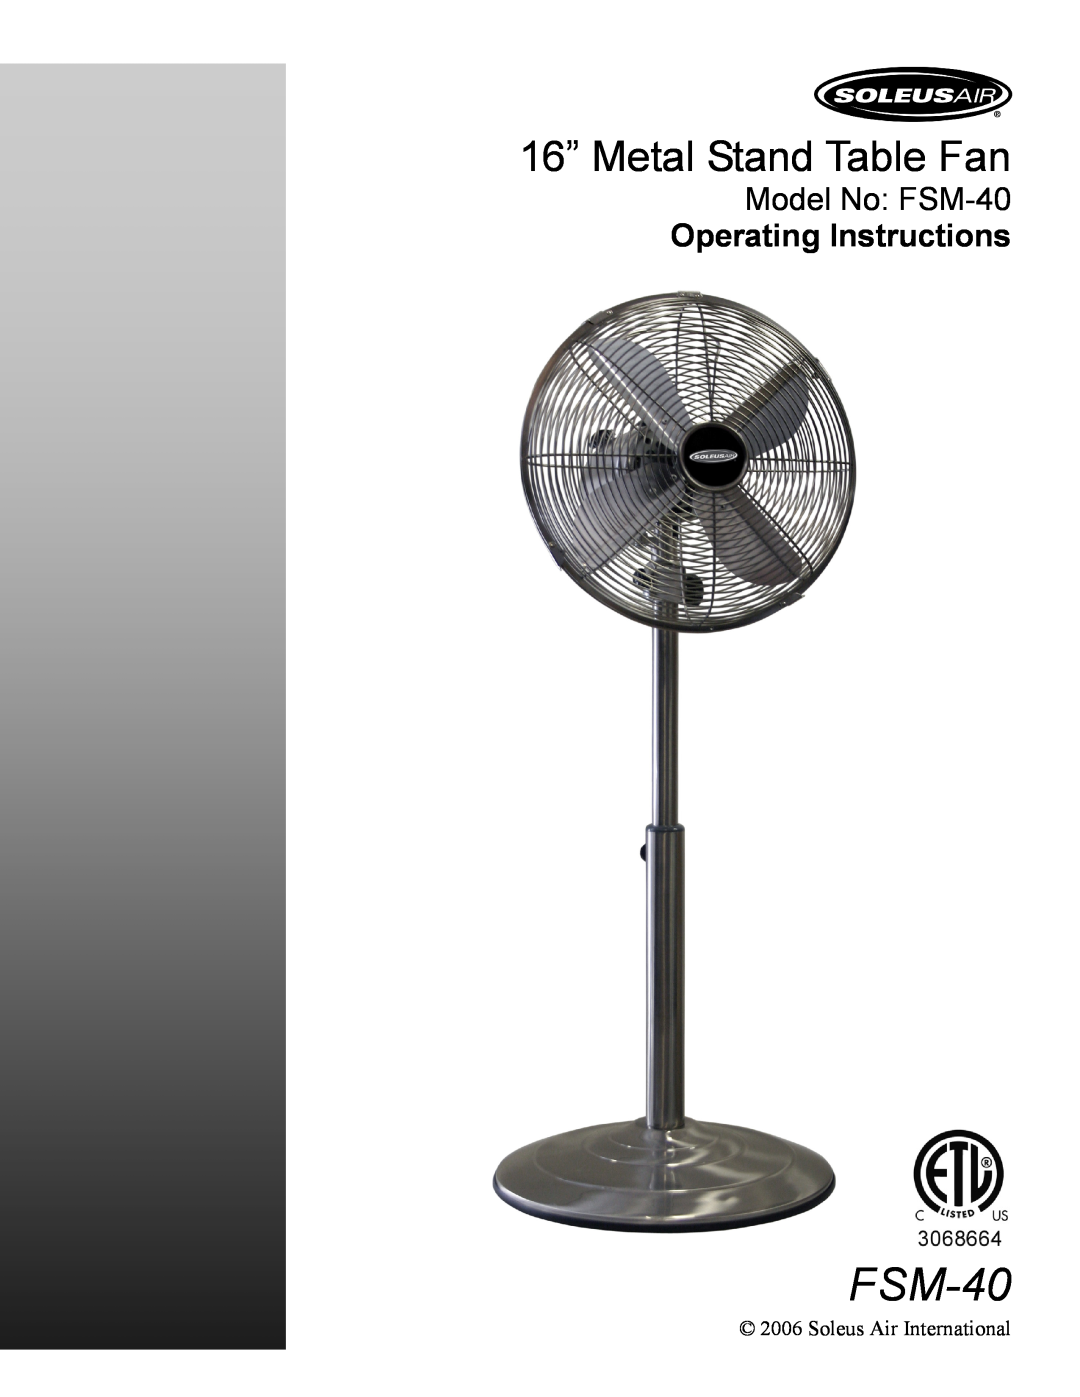 Soleus Air manual 16” Metal Stand Table Fan, Model No FSM-40 Operating Instructions 